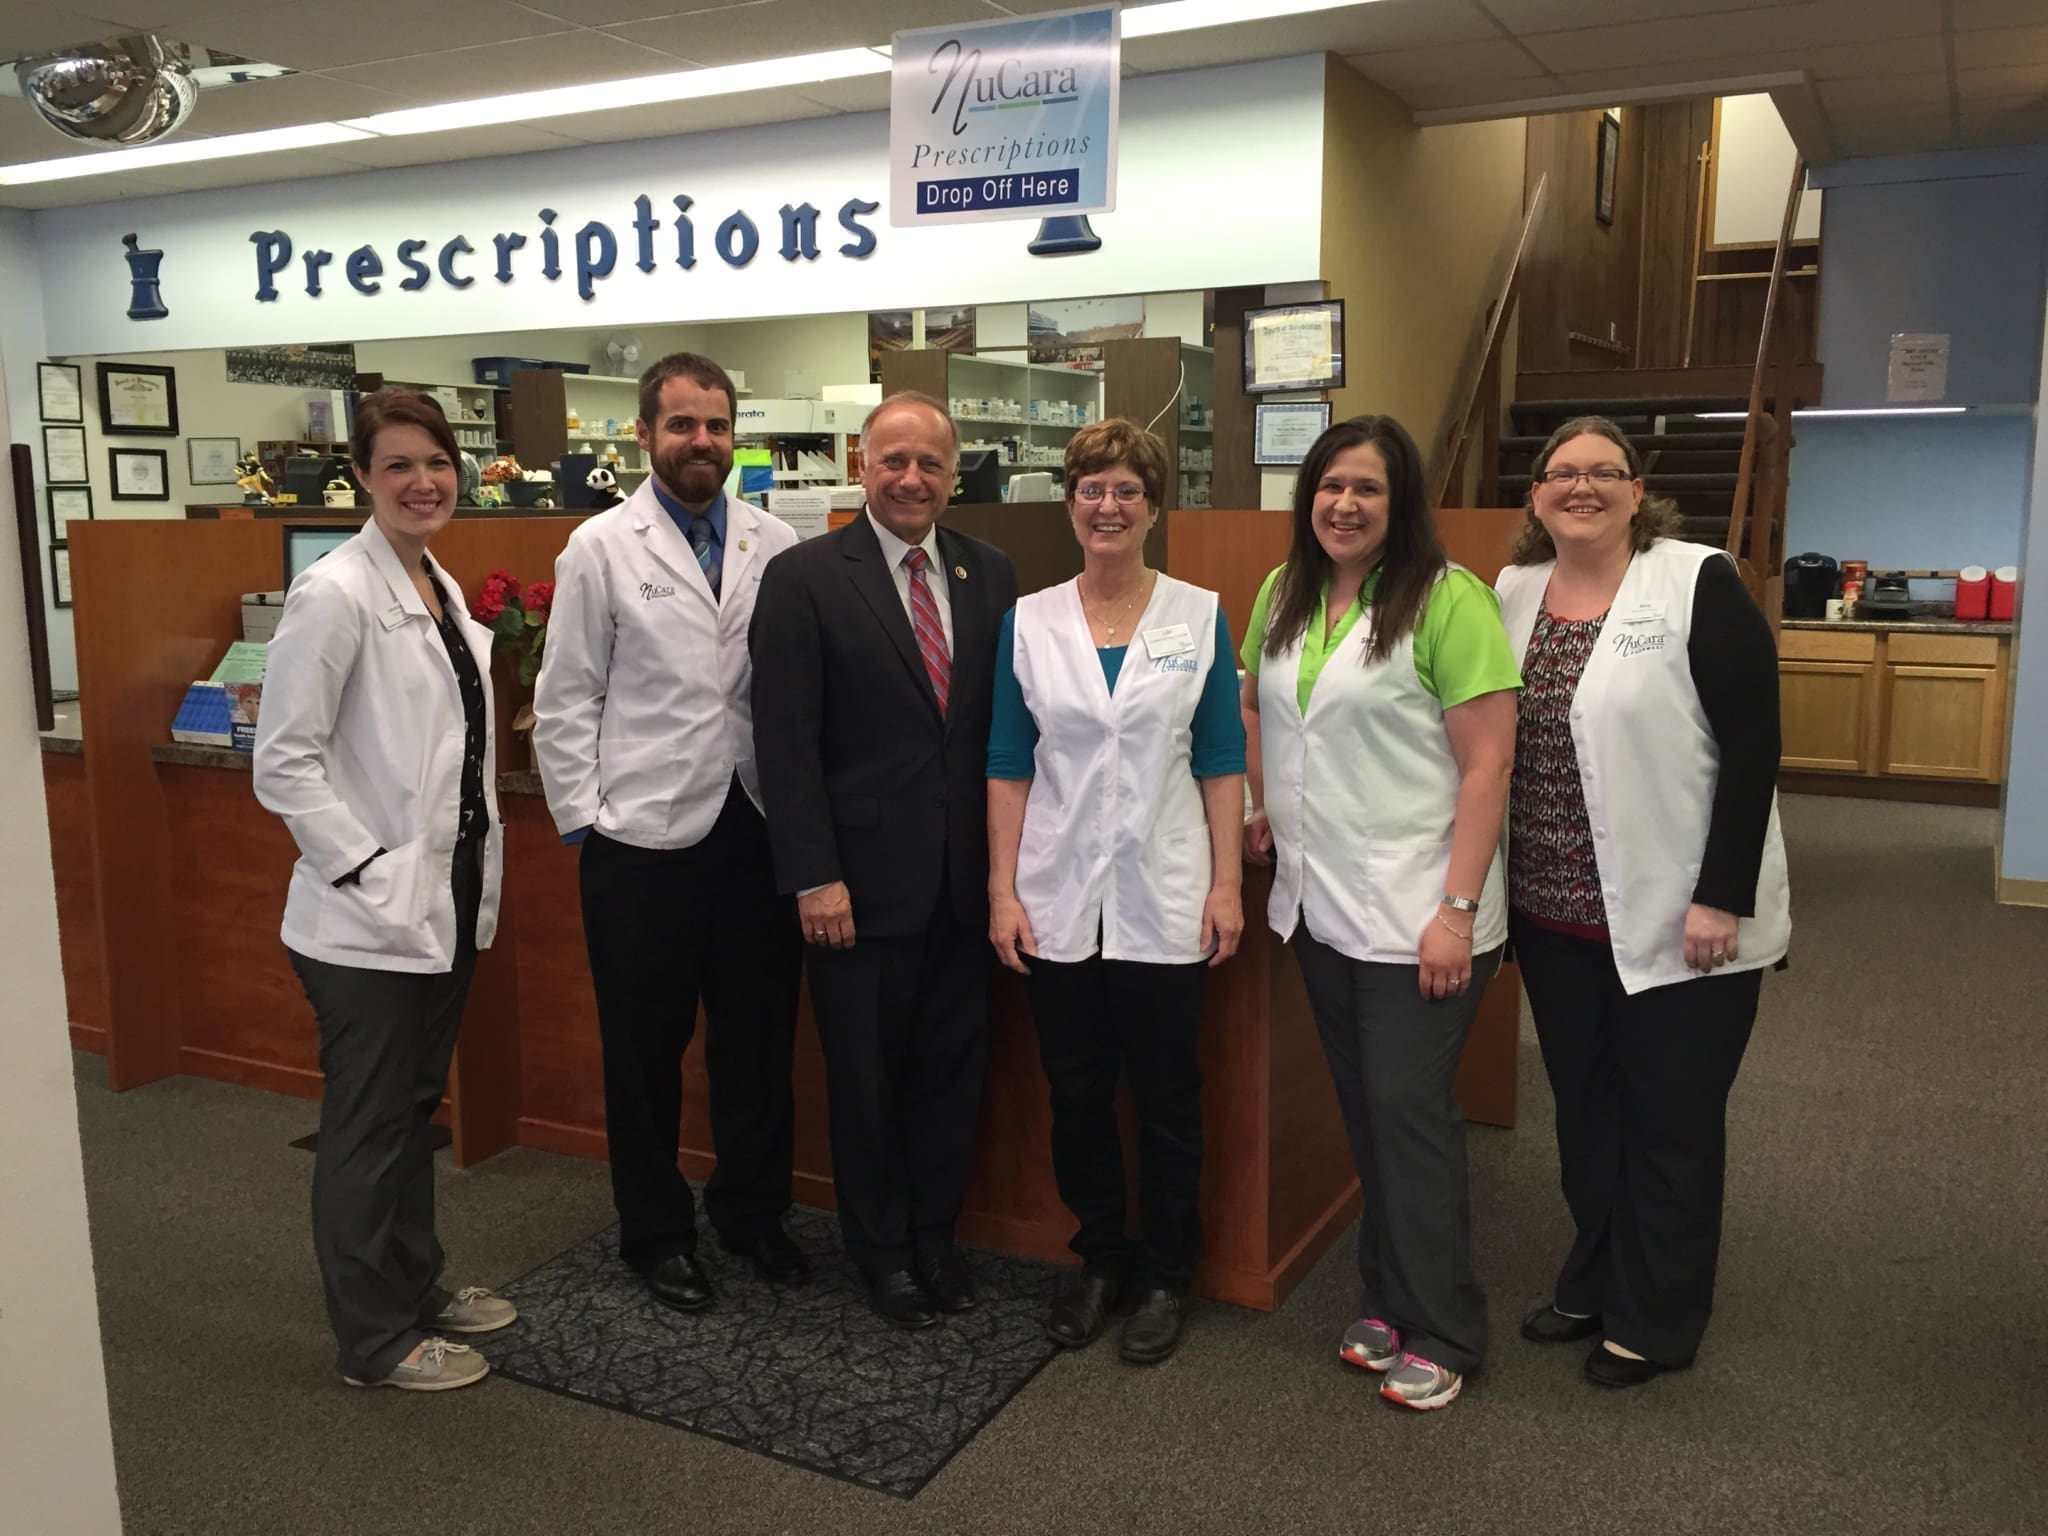 Rep. Steve King (R-IA) participated in an NACDS RxIMPACT pharmacy tour at a Nucura Pharmacy in Nevada, Iowa today.